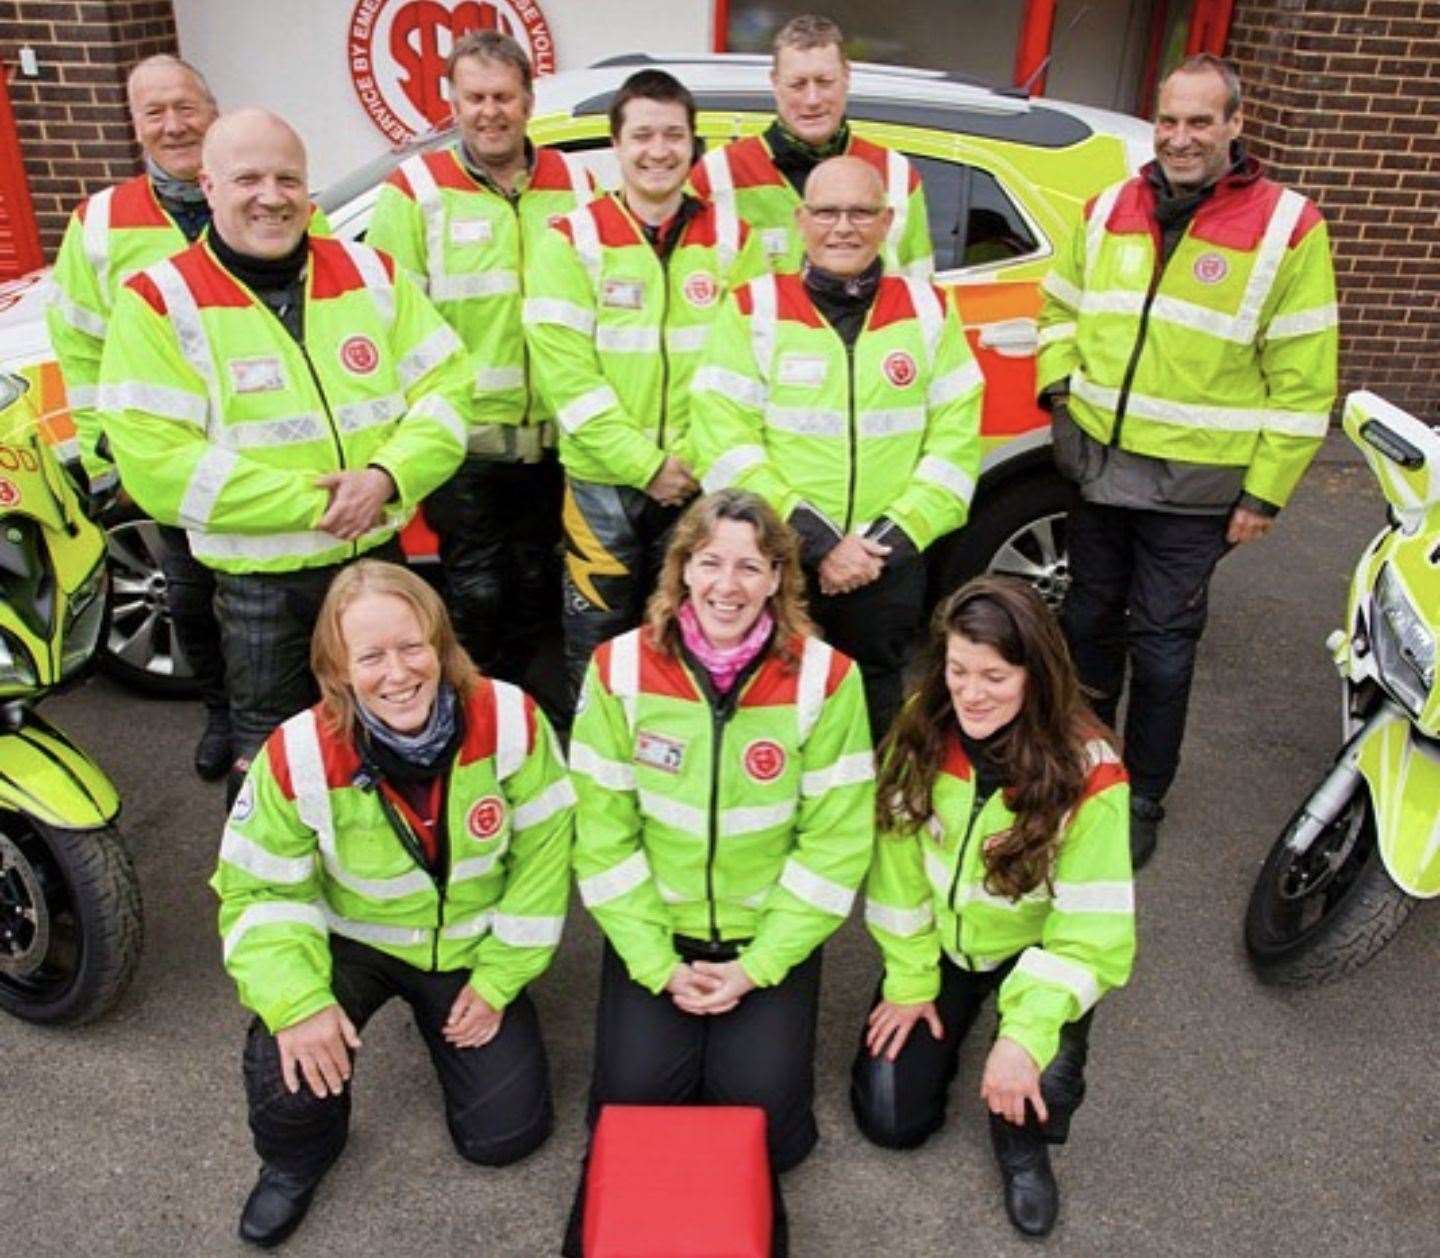 SERV Kent Bloodrunners needs to raise £15k to purchase its previously sponsored blood car